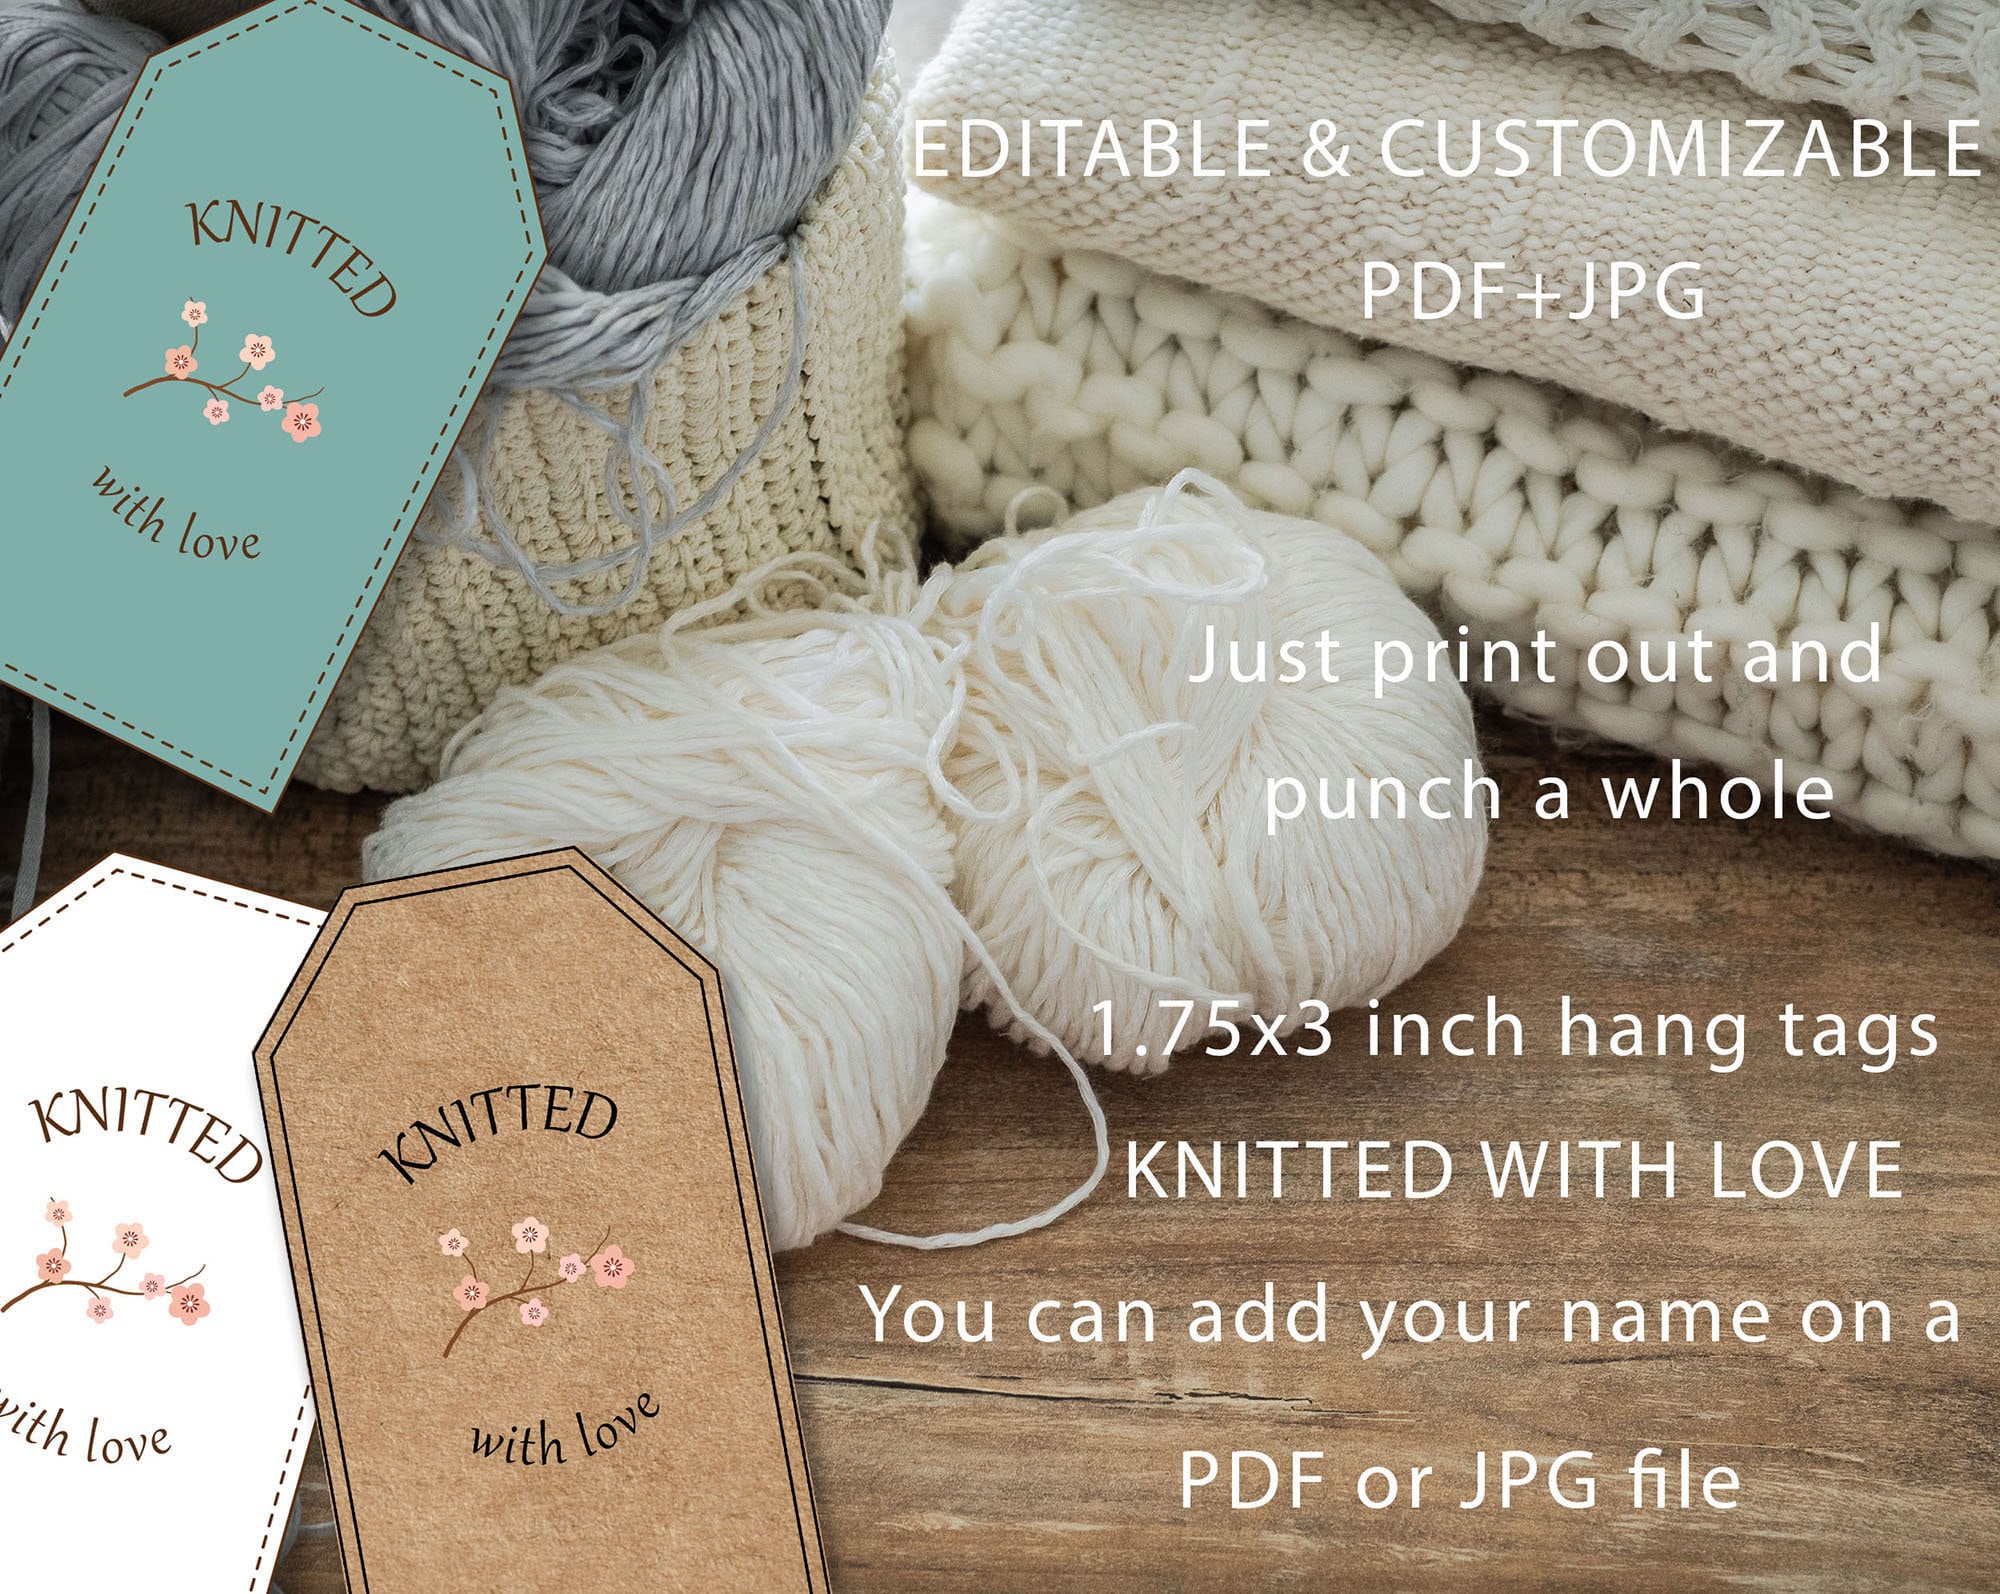 40x40mm Crochet Tags / Knitting Tags | Clothing Tags Custom or Knitting  Accessories | Wooden Tags / Personalized Label Tags